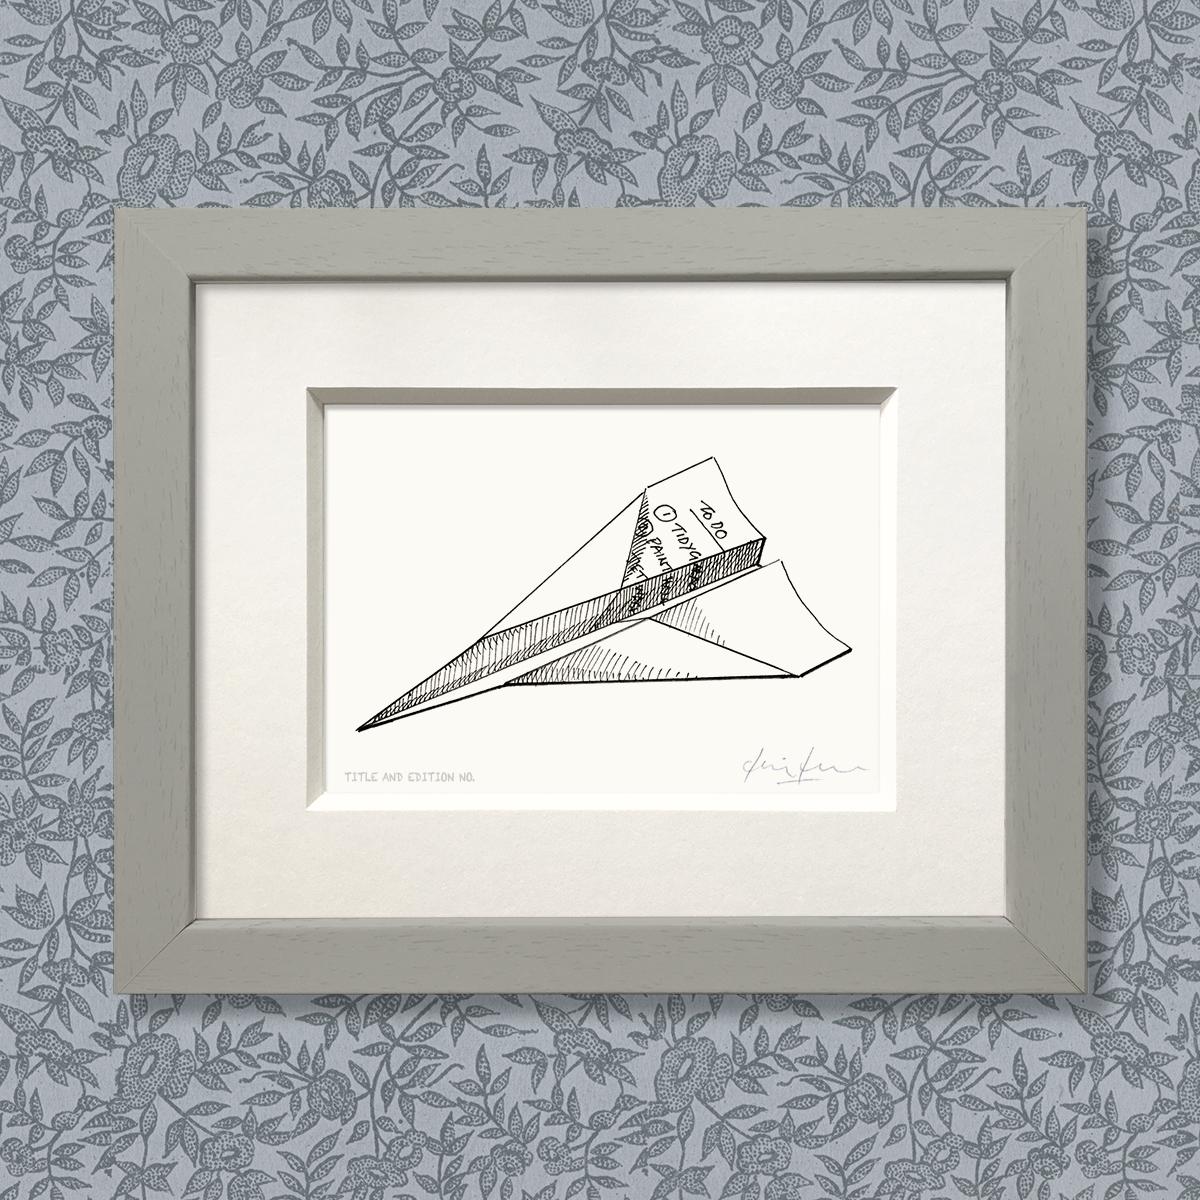 Limited edition print from a pen and ink drawing of a to-do list folded into a paper aeroplane in a grey frame